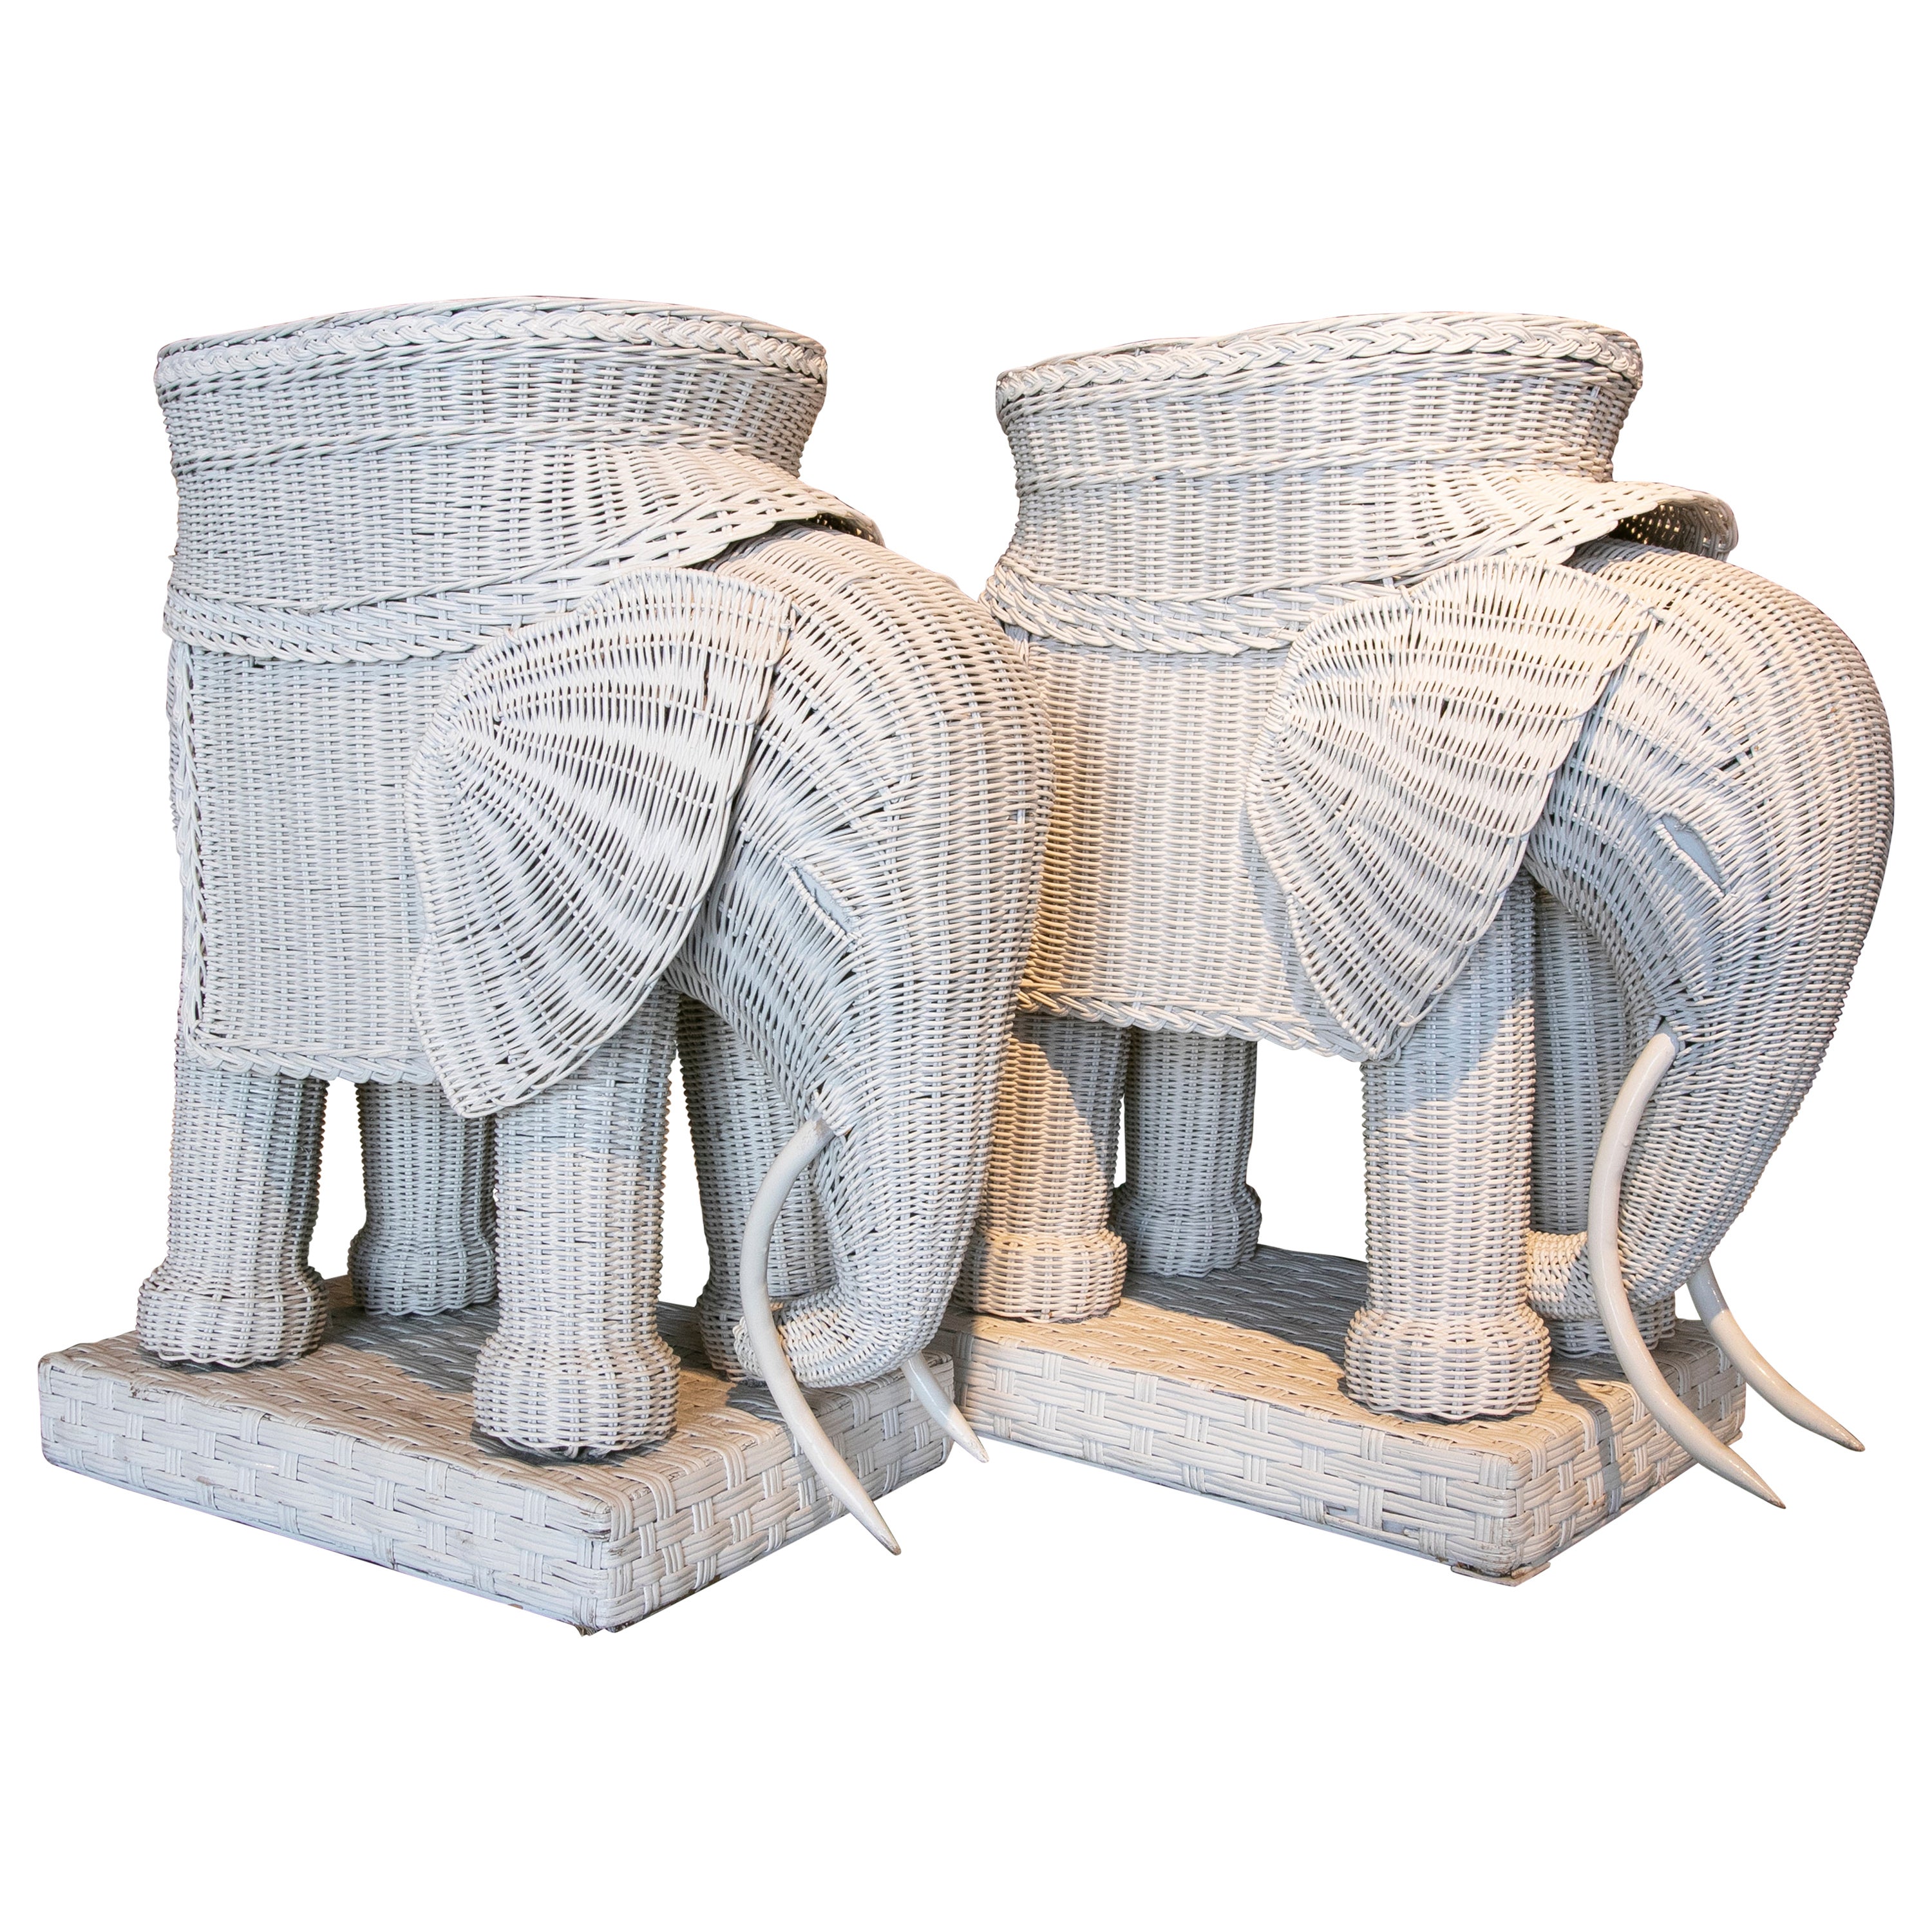 1970s Pair of Wicker Tables in the Shape of Elephants and Painted in White